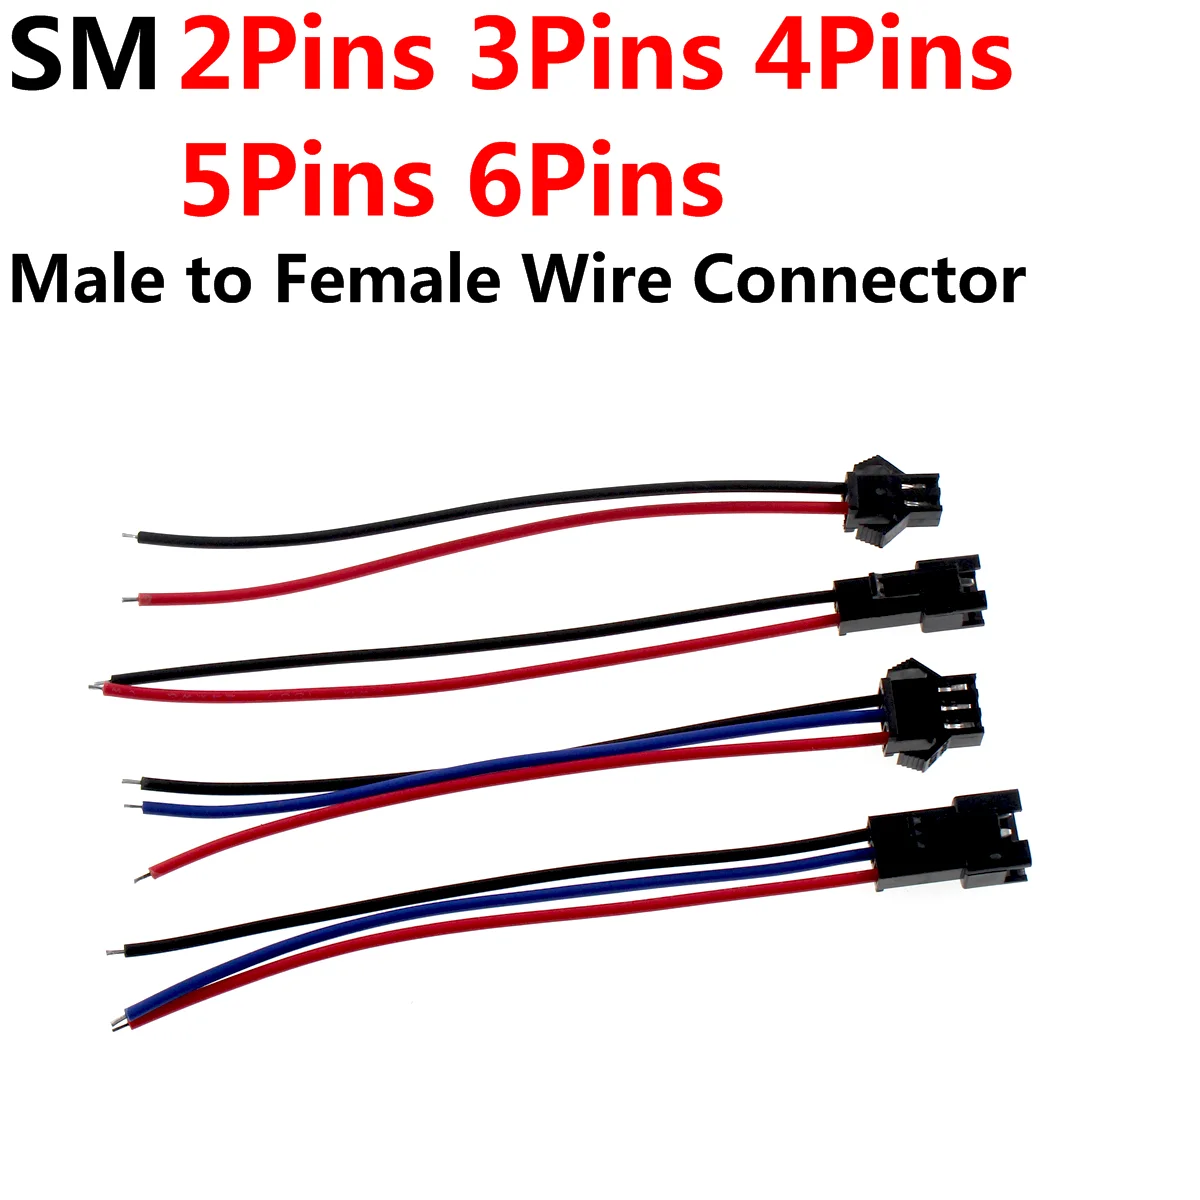 

20Pairs SM 2Pins 3Pins 4pins 5pins 6pins 20cm 30cm 40cm Plug Male to Female Wire Connector